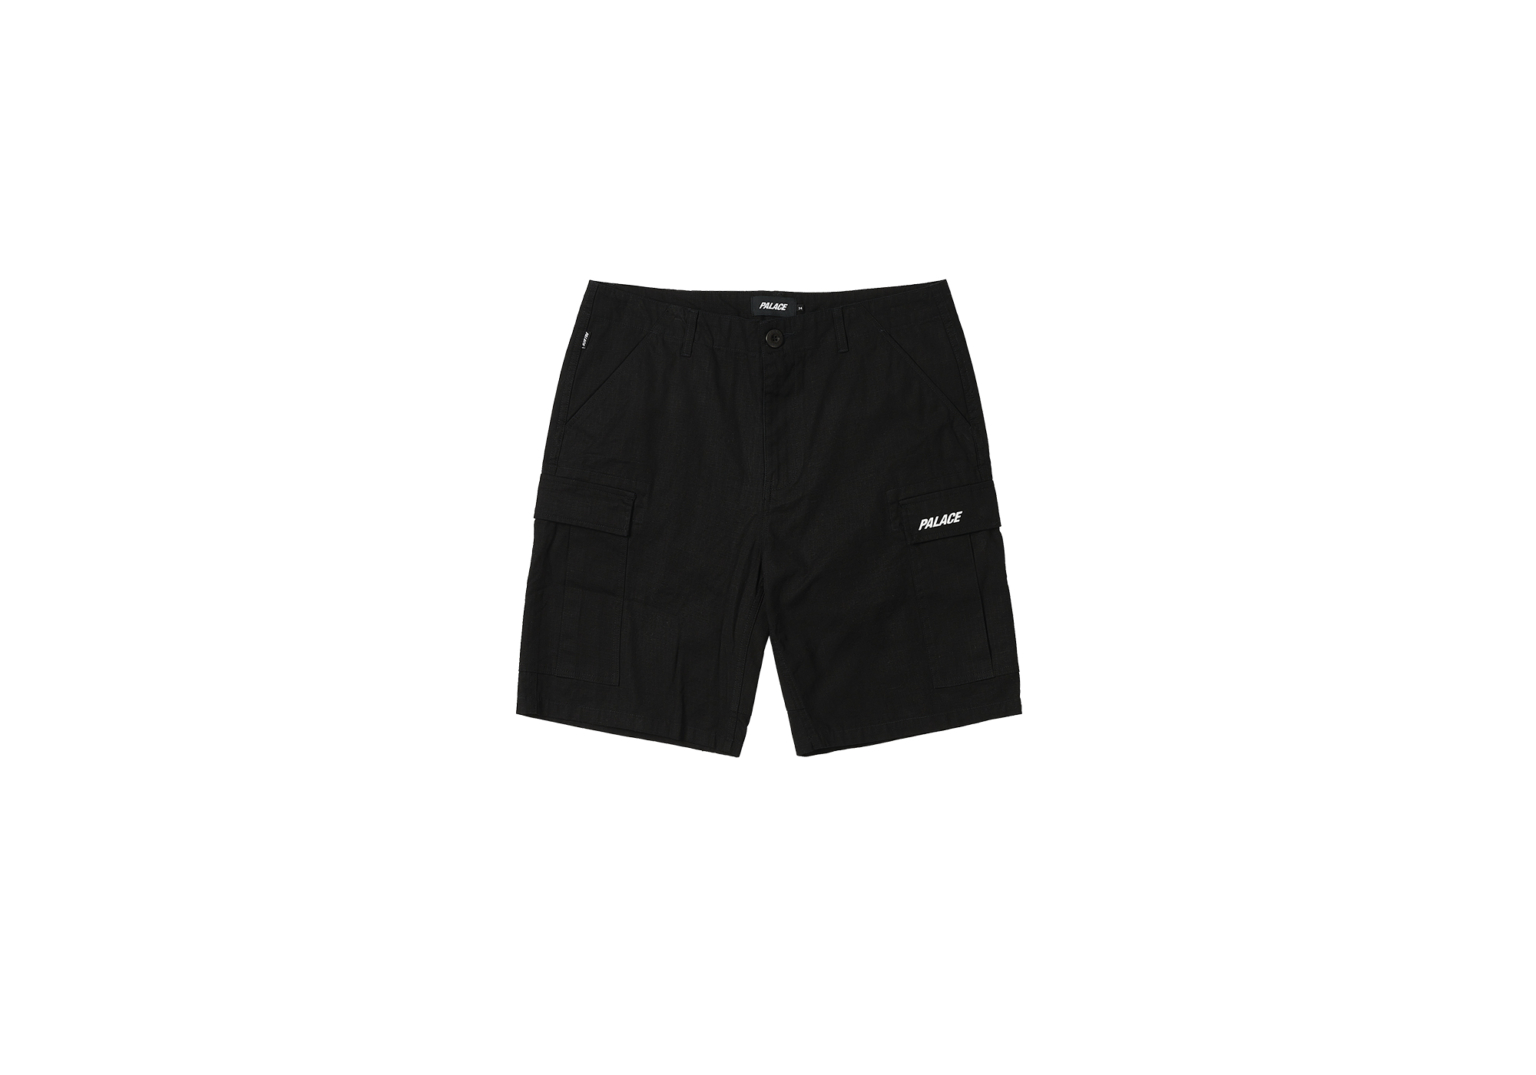 Ripstop Cotton Cargo Short Black one color - Summer 2023 - Palace Community